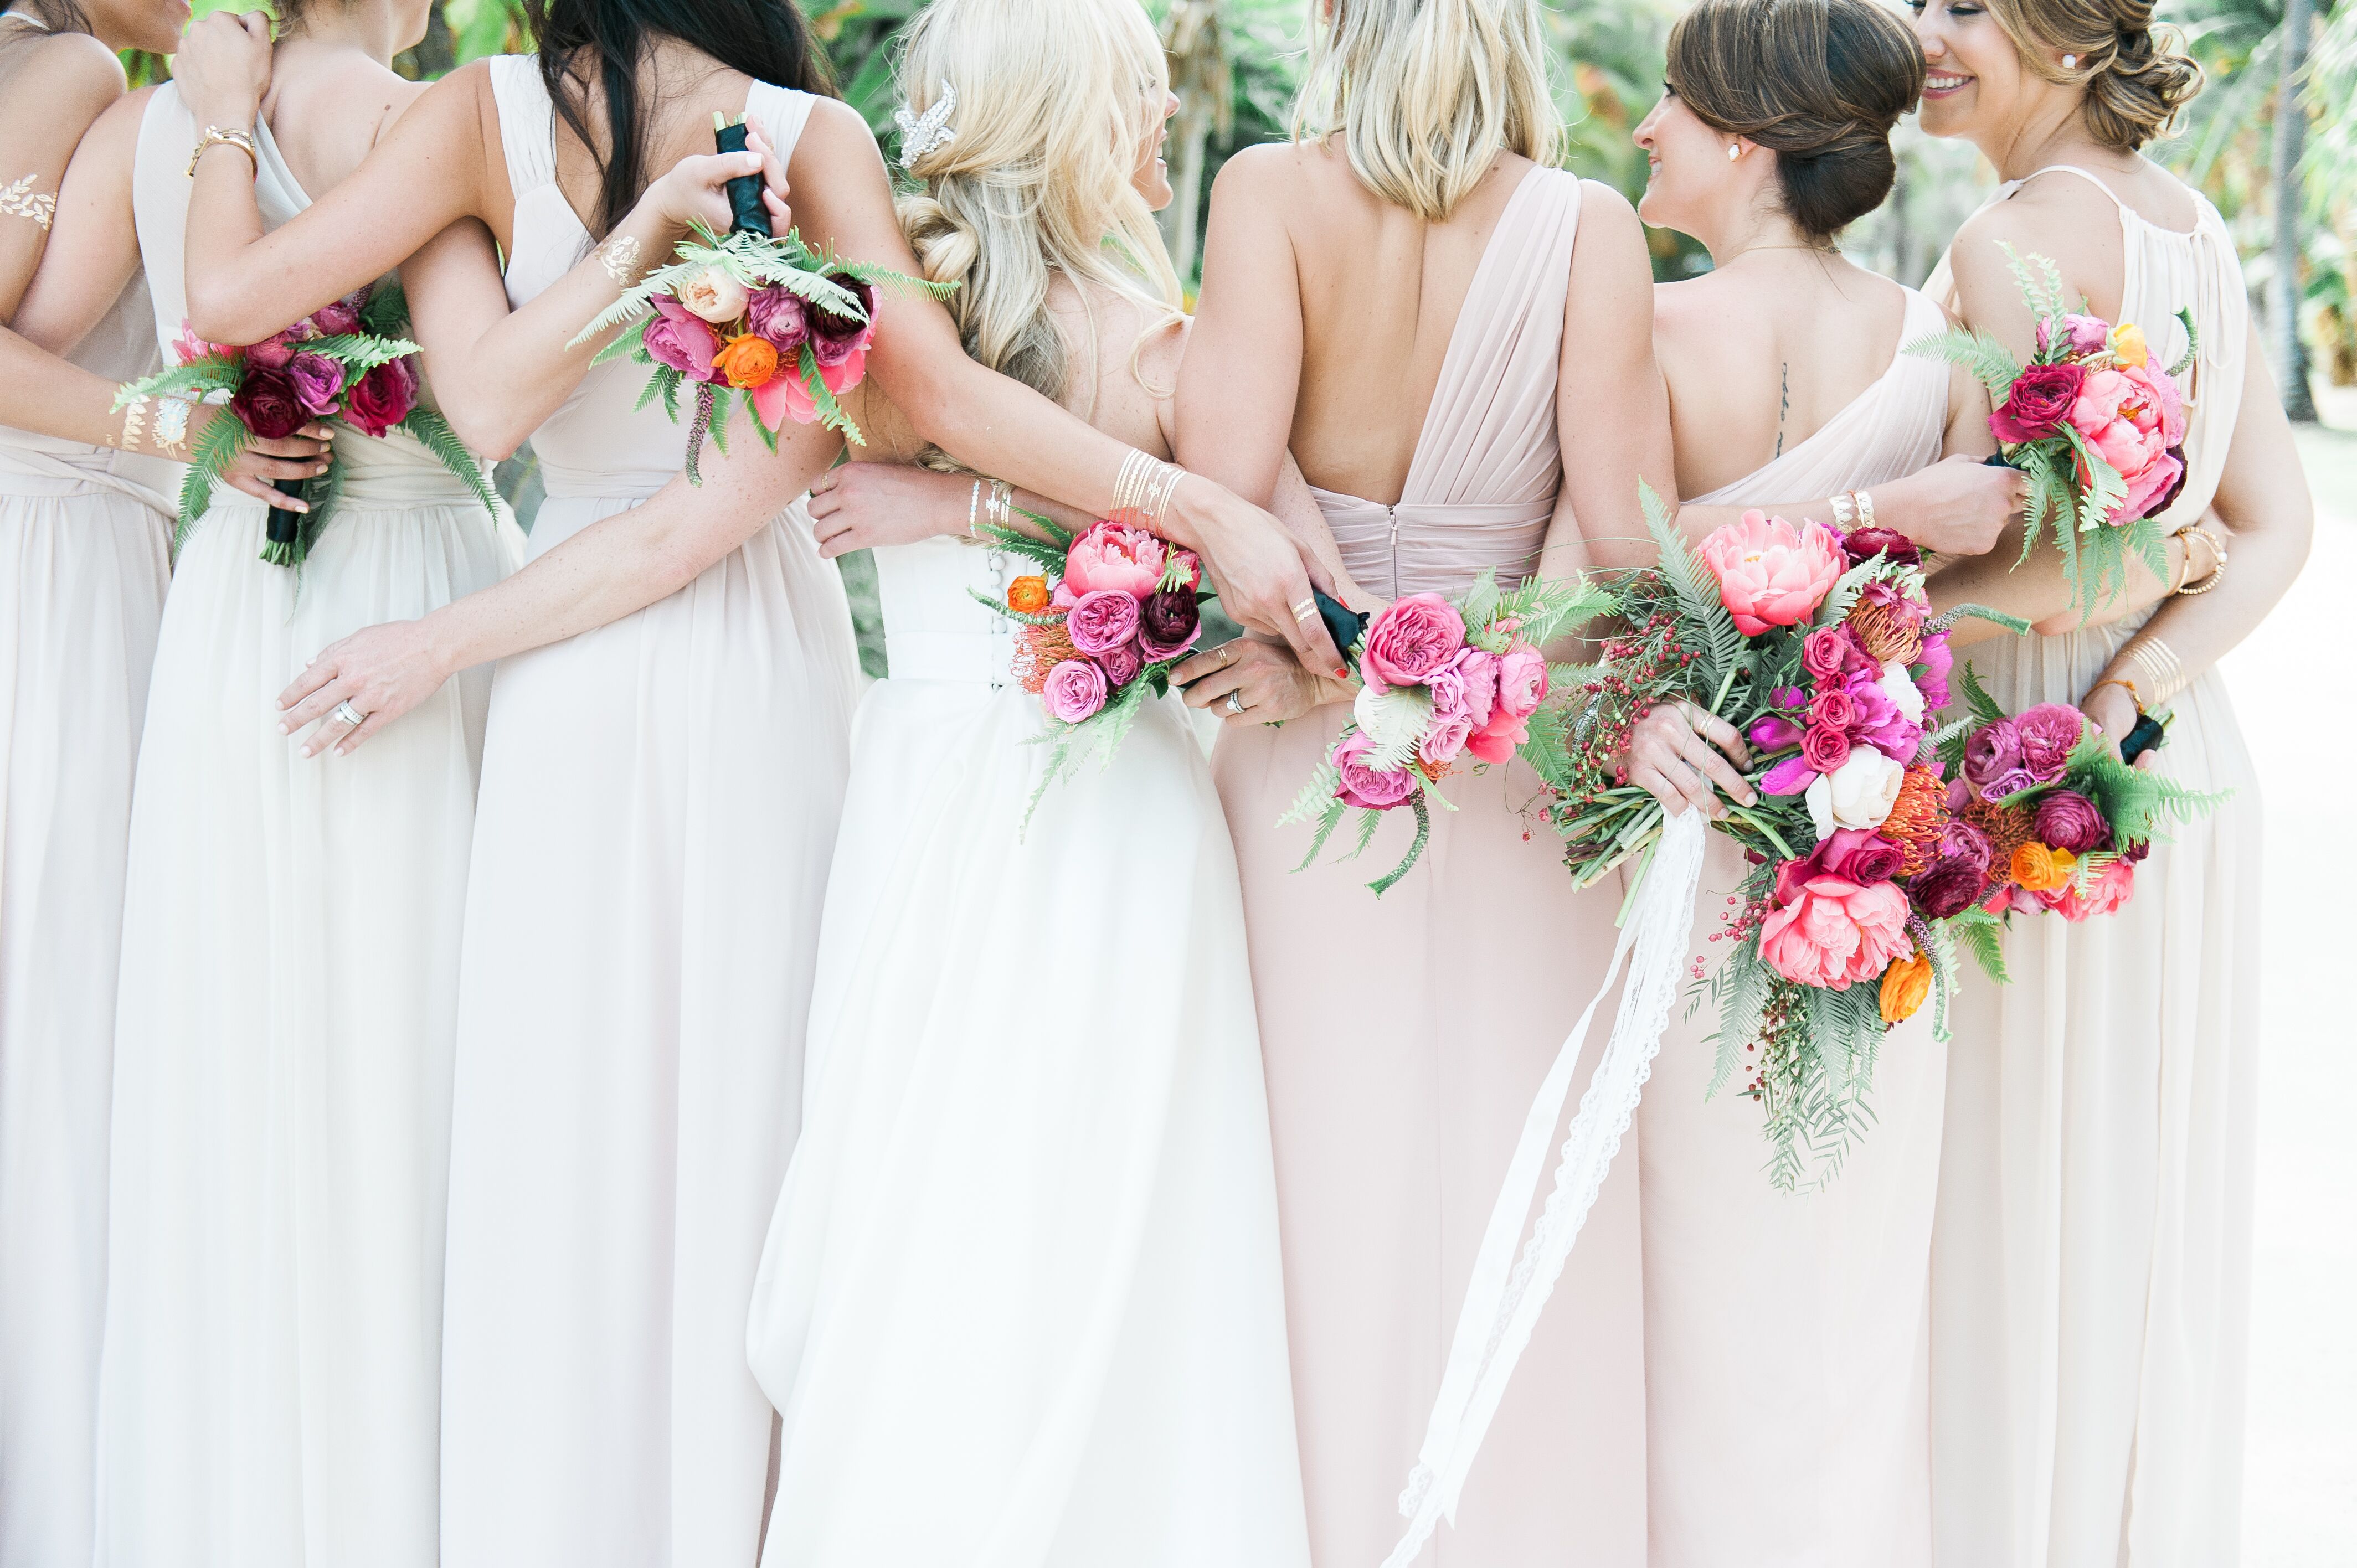 Neutral One-Shouldered Bridesmaid Dresses